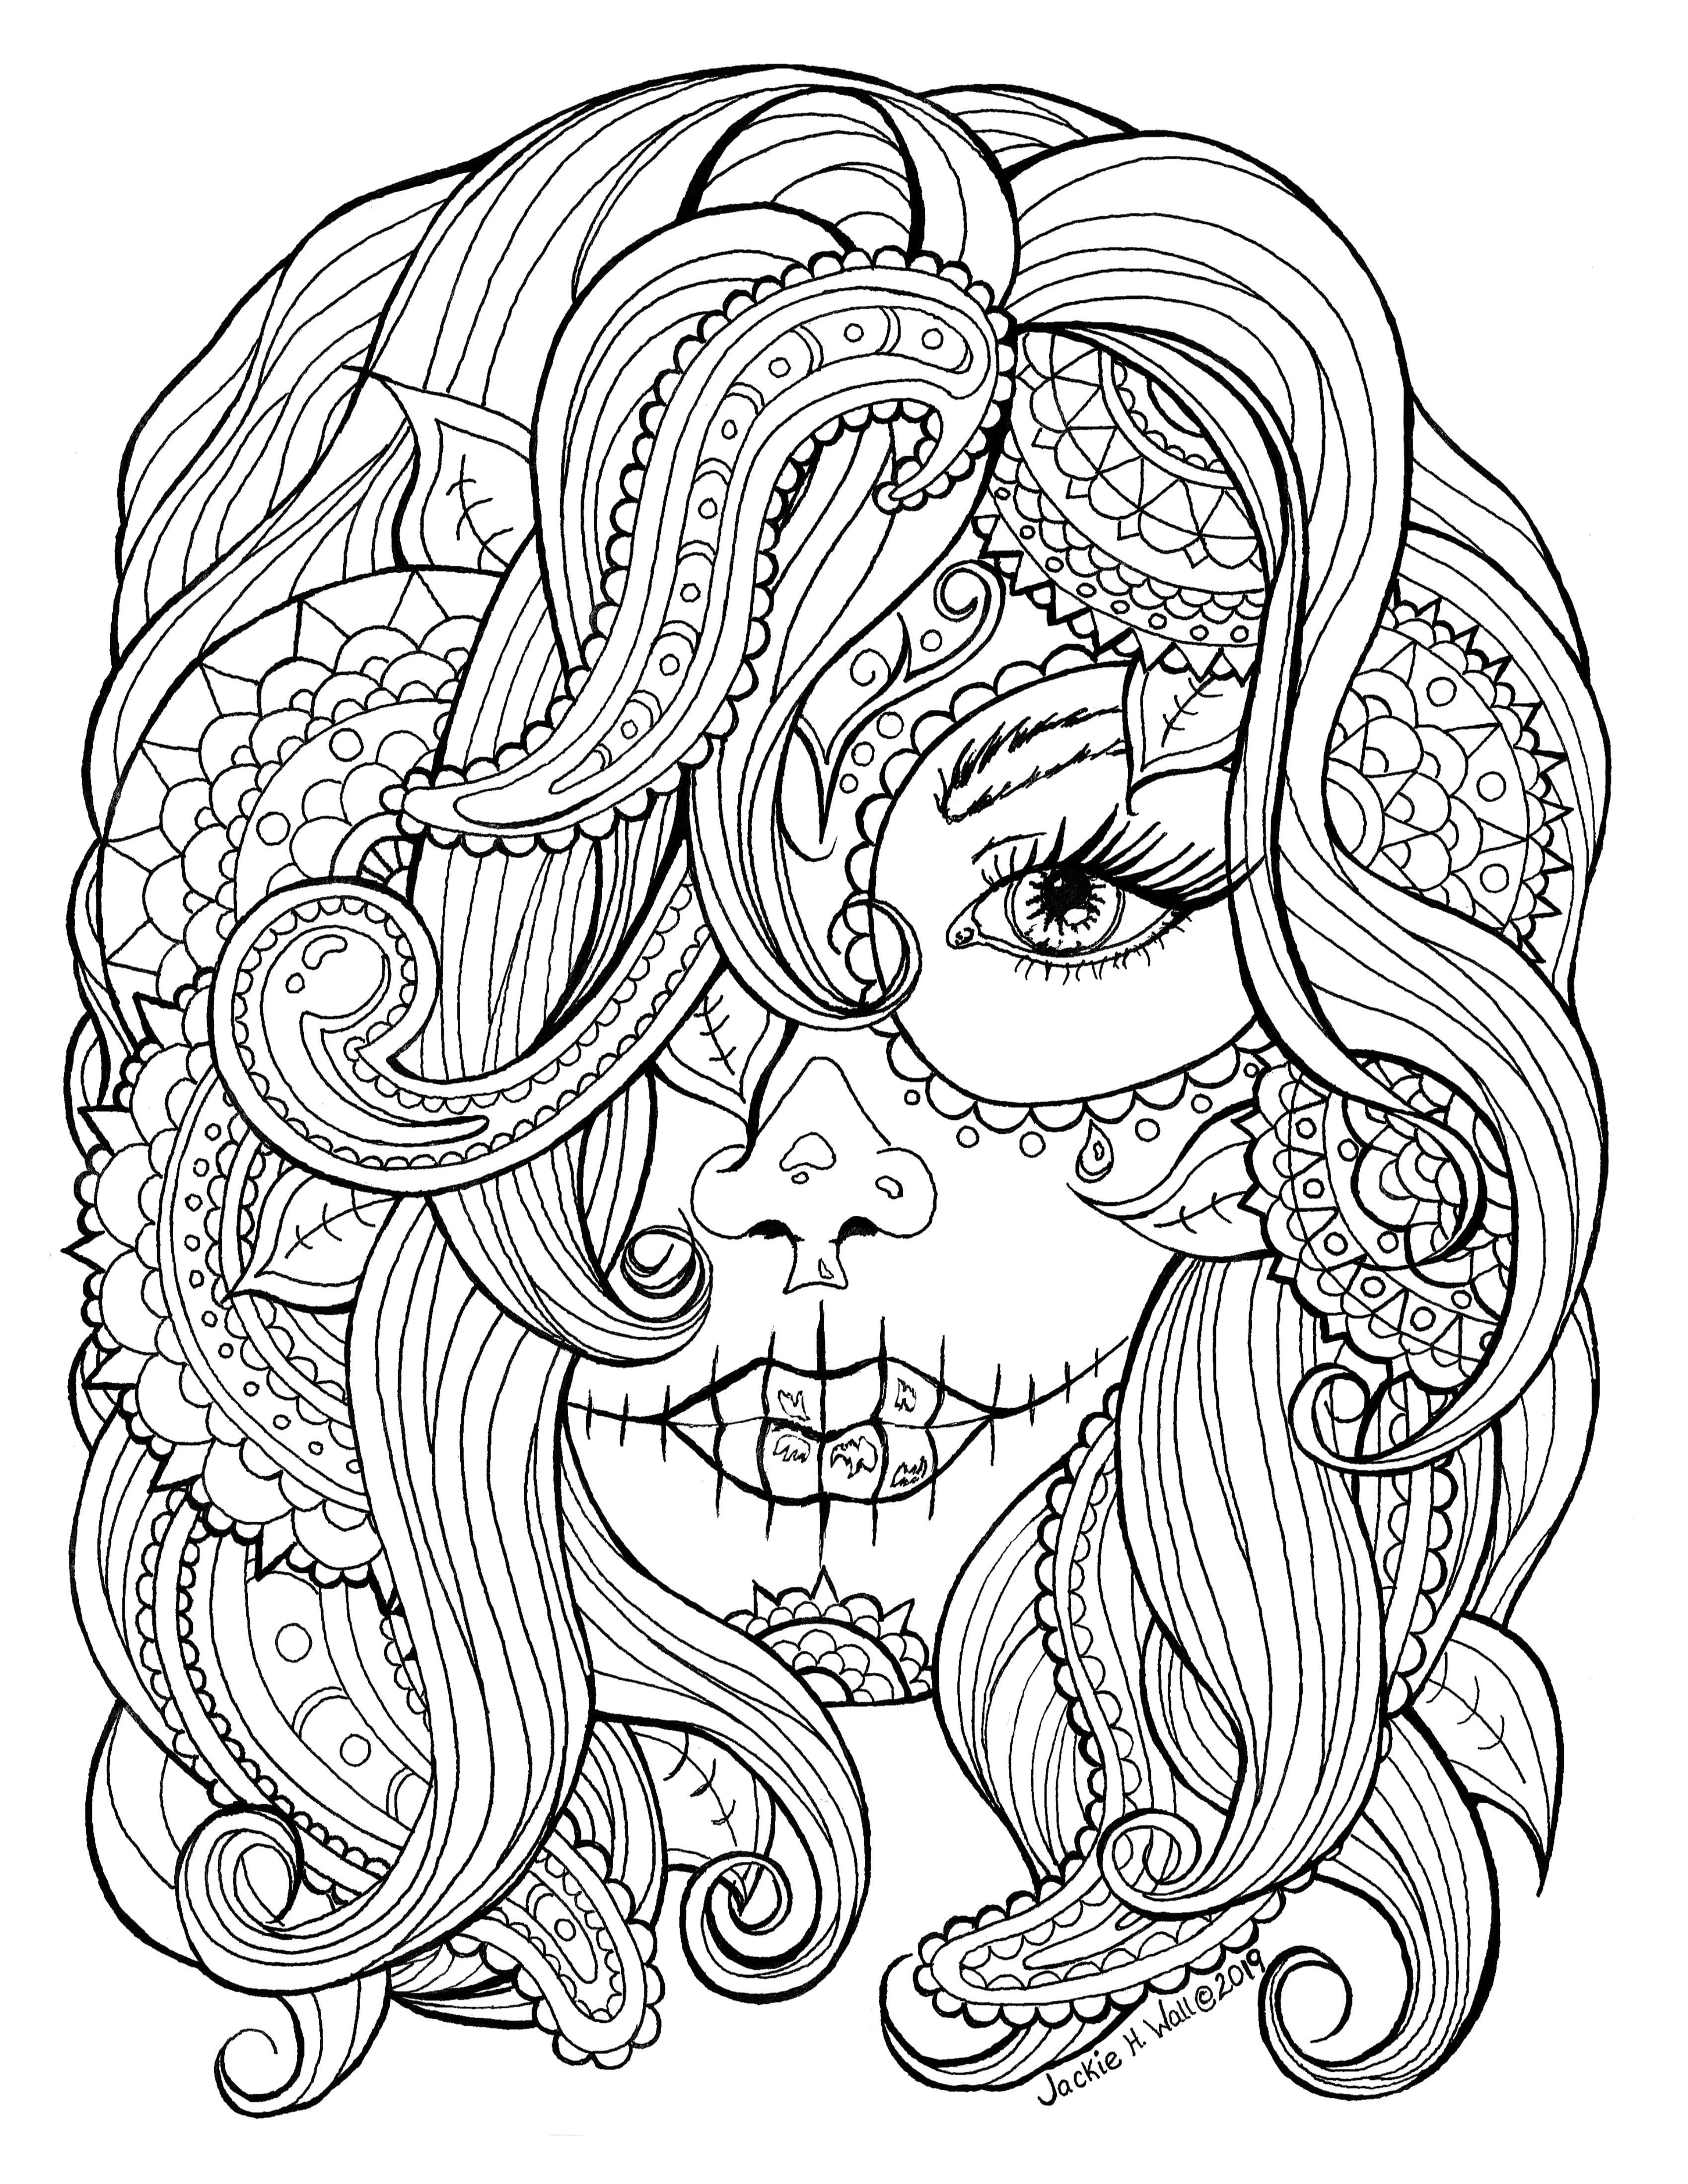 Sugar Skull Queen Colouring Page